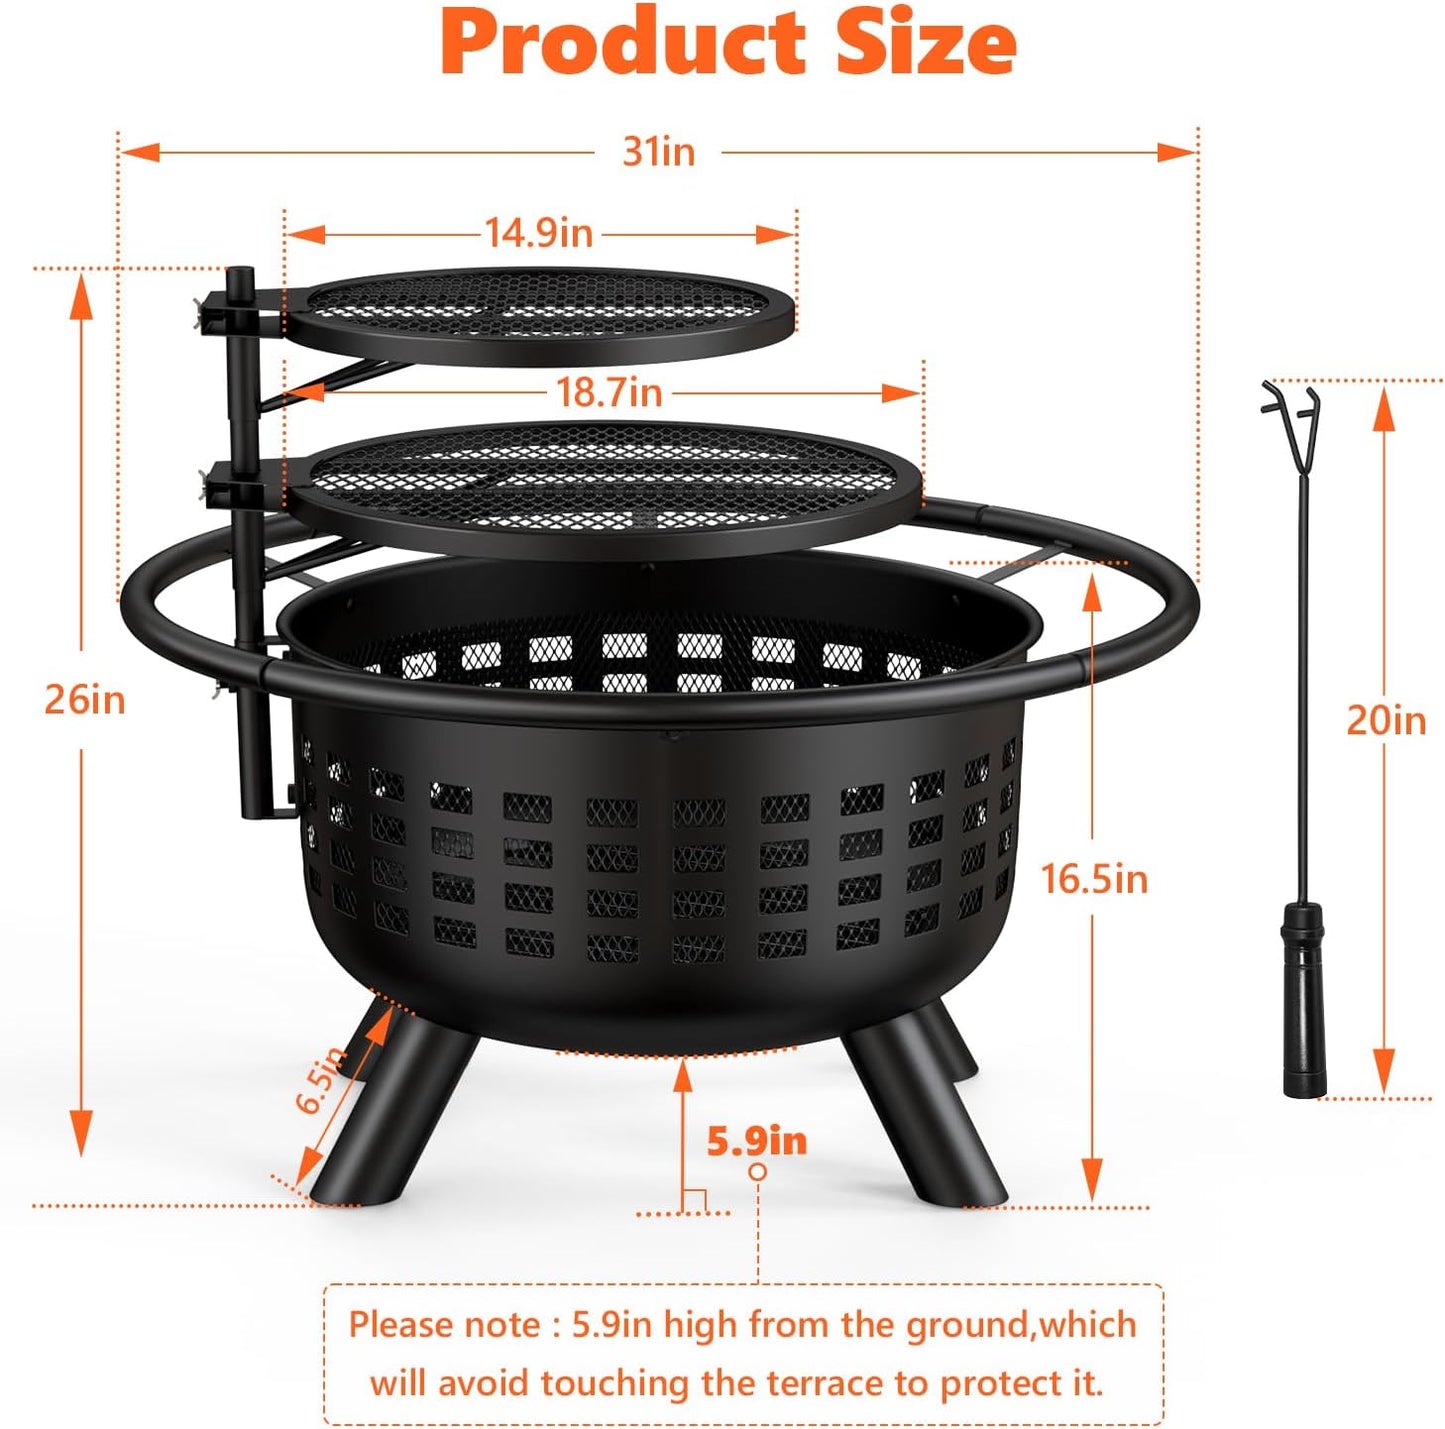 31 Inch Fire Pit with 2 Grills, Outdoor Wood Burning Firepit for outside Large Steel Firepit Bowl with Steel BBQ Grill Cooking Grates, Cover for Garden Patio Backyard Picnic Camping